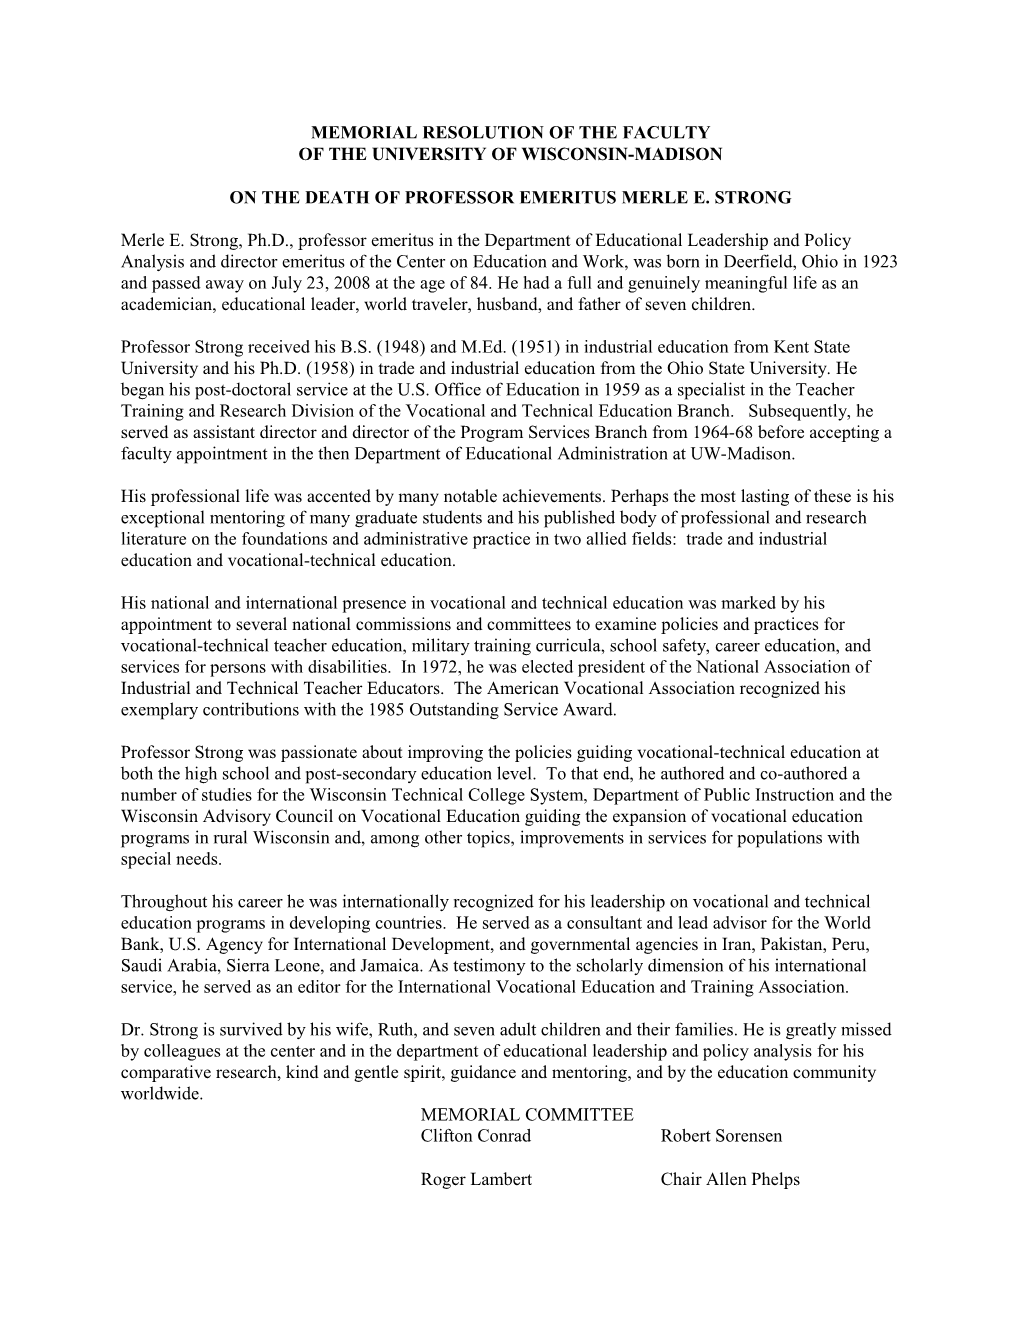 Memorial Resolution of the Faculty